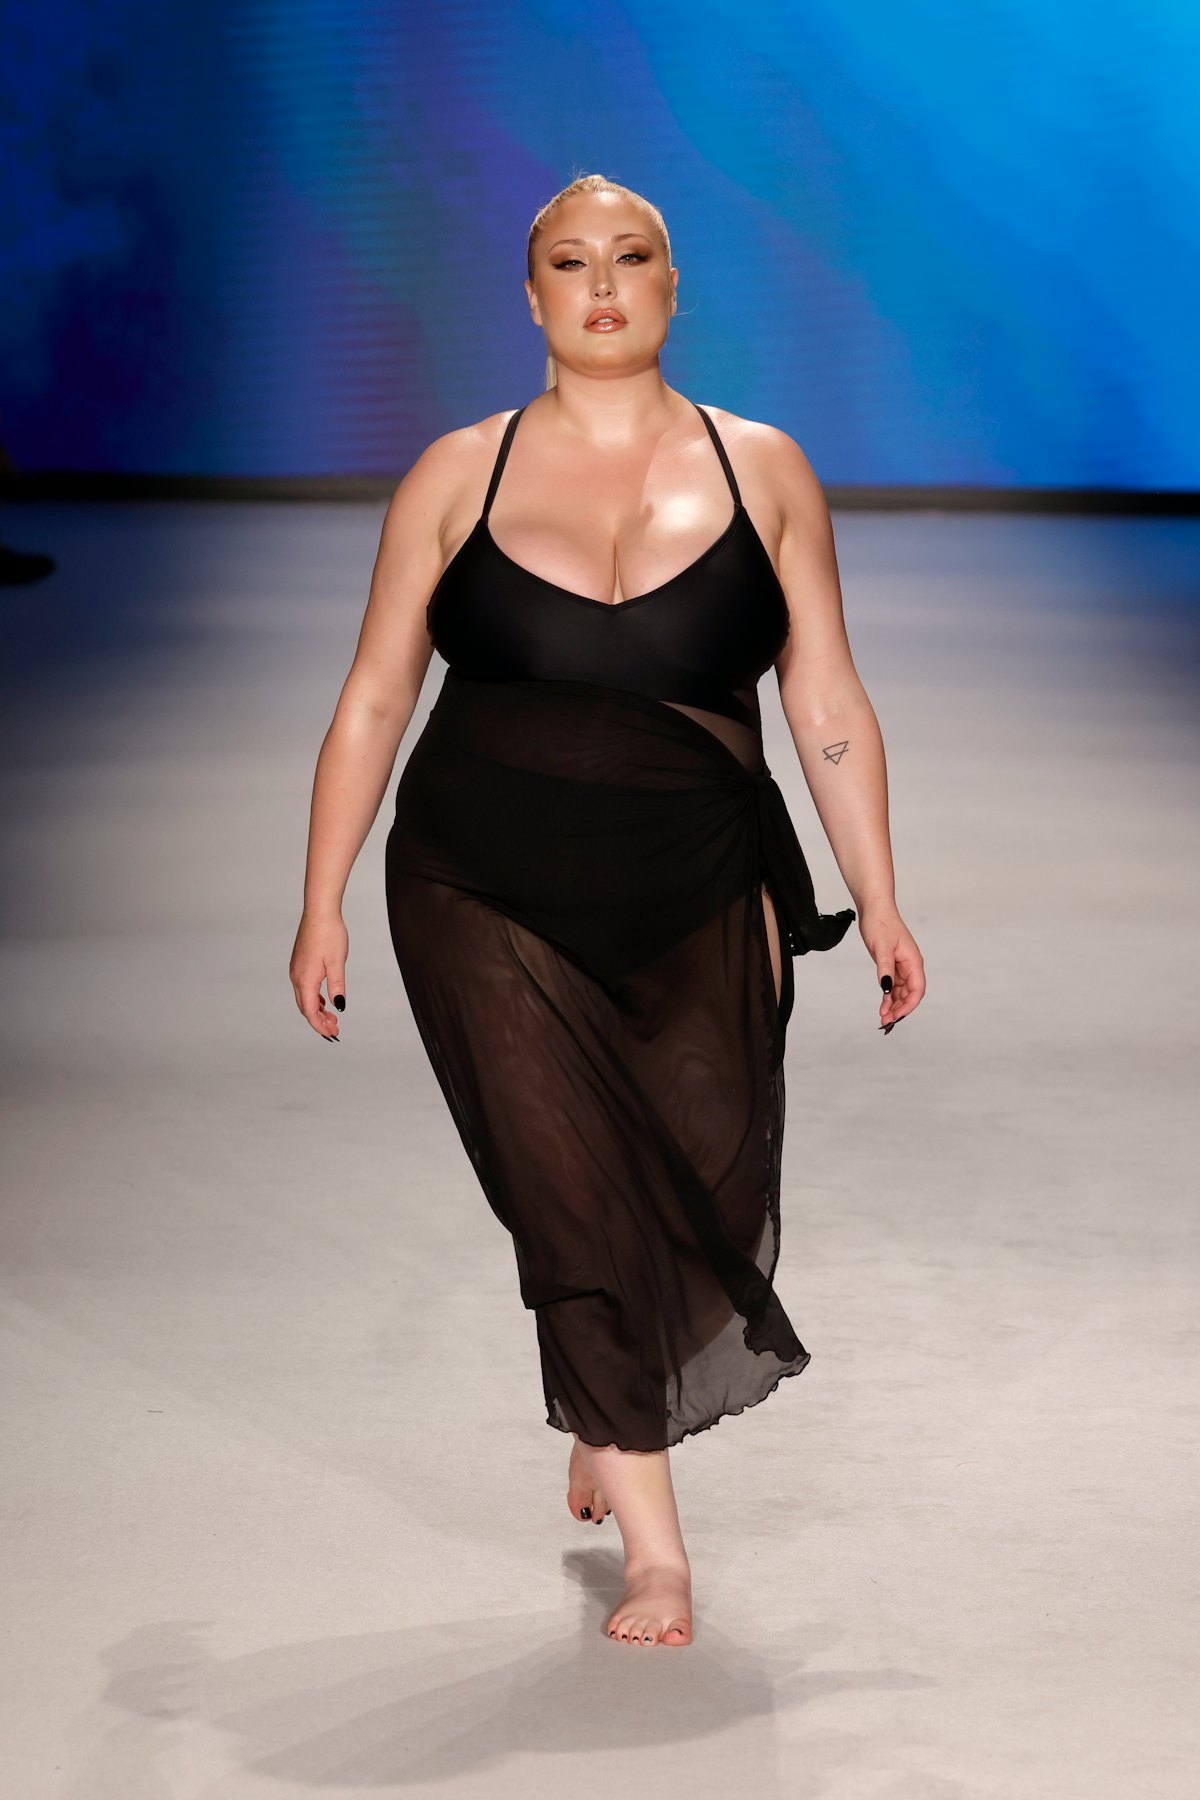 Hayley Hasselhoff walks the runway for Cupshe x Tabria Majors Fashion Show during Paraiso Miami Beac...